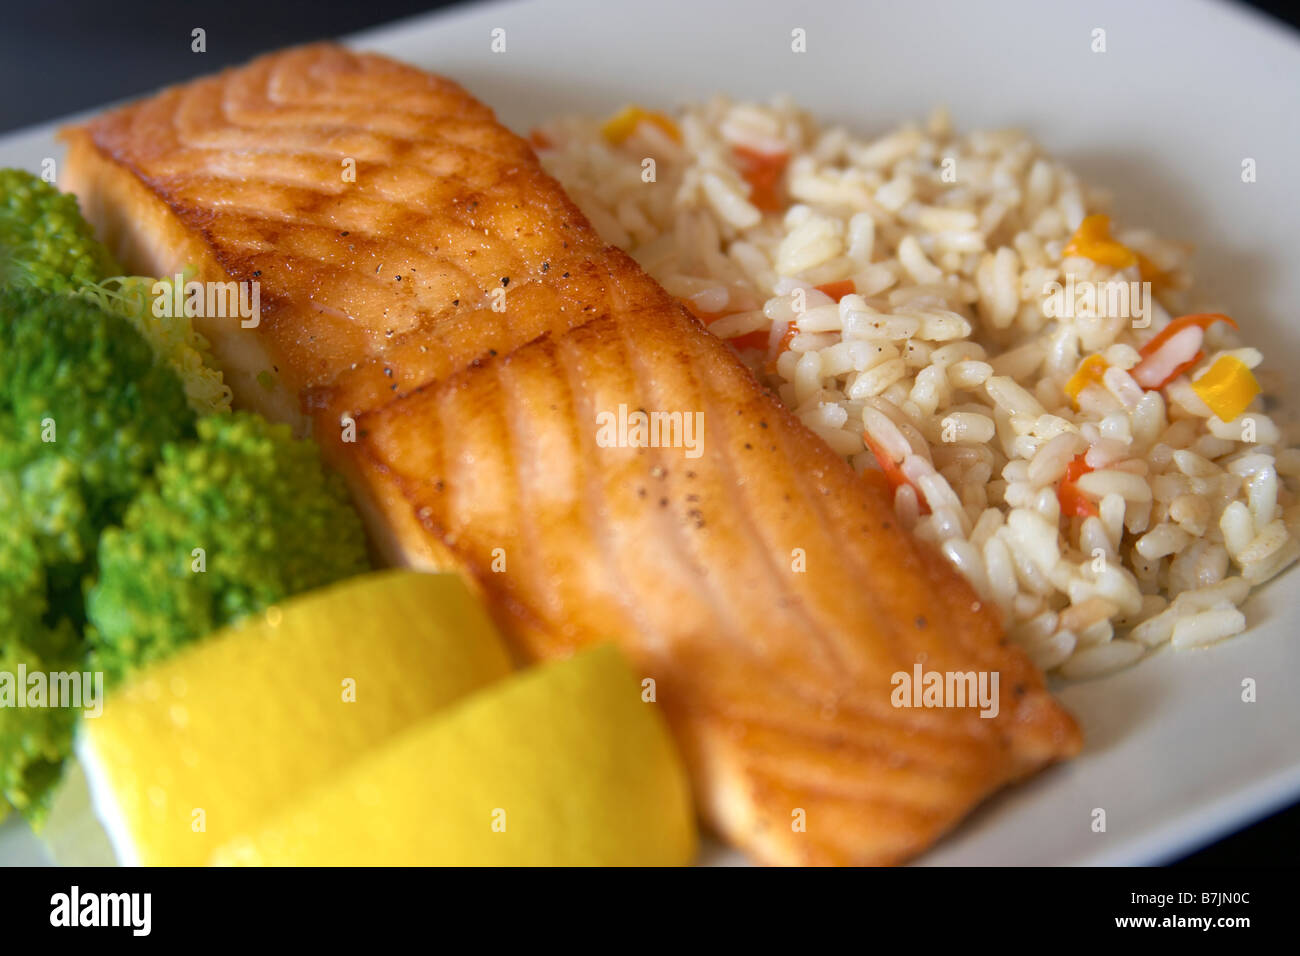 Dinner plate of salmon with rice and broccoli garnished with lemon wedges, Canada, Ontario Stock Photo